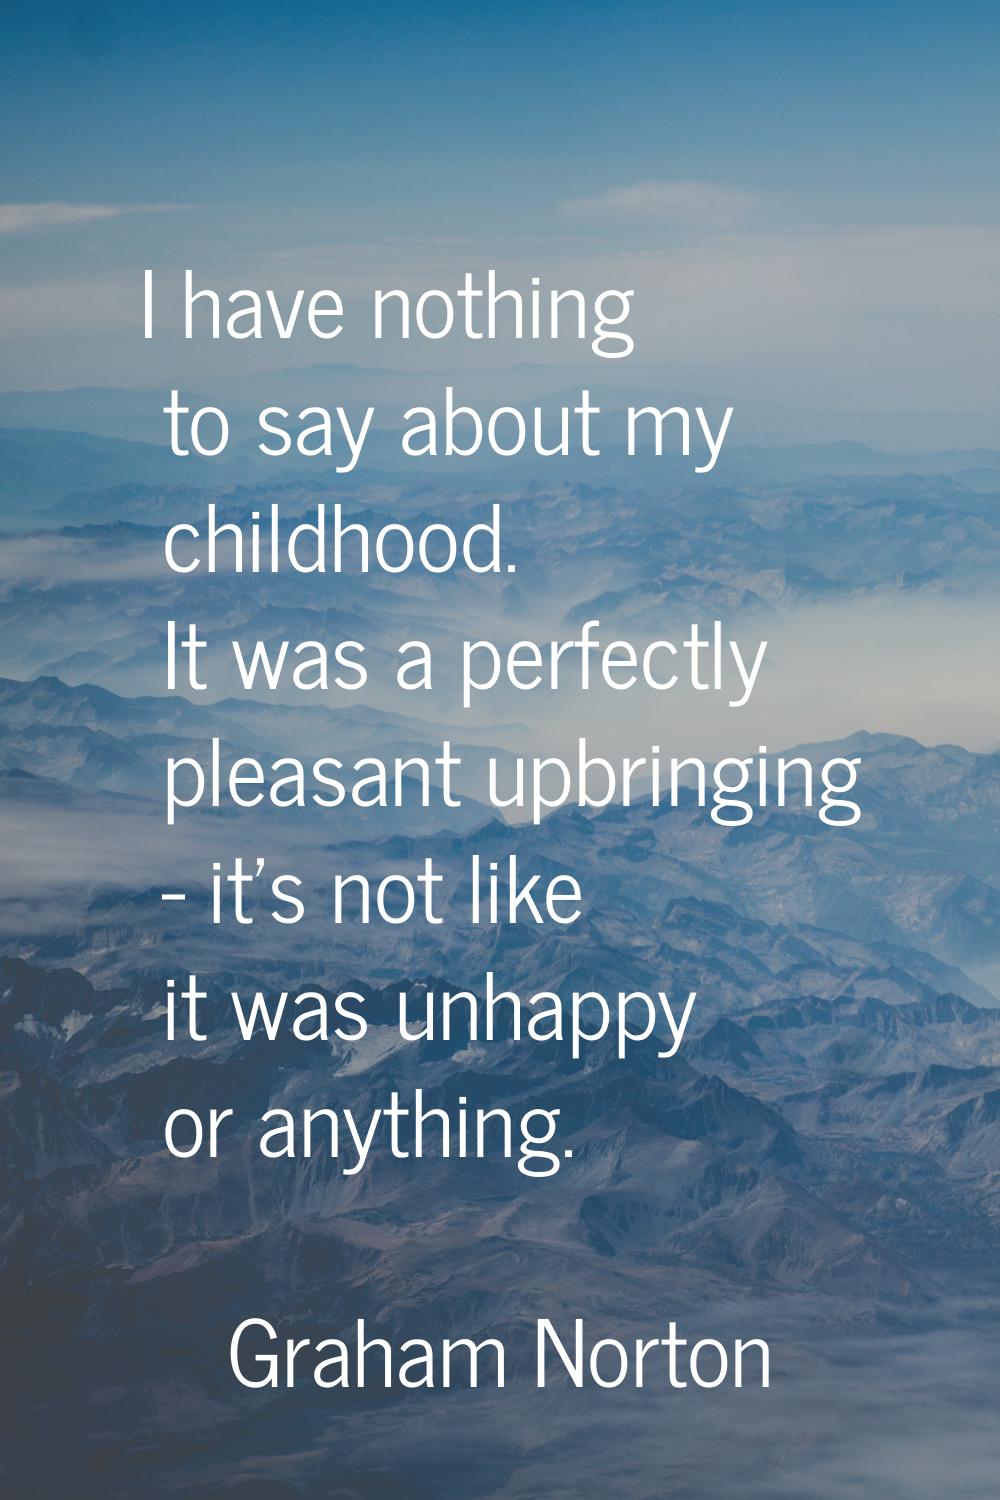 I have nothing to say about my childhood. It was a perfectly pleasant upbringing - it's not like it